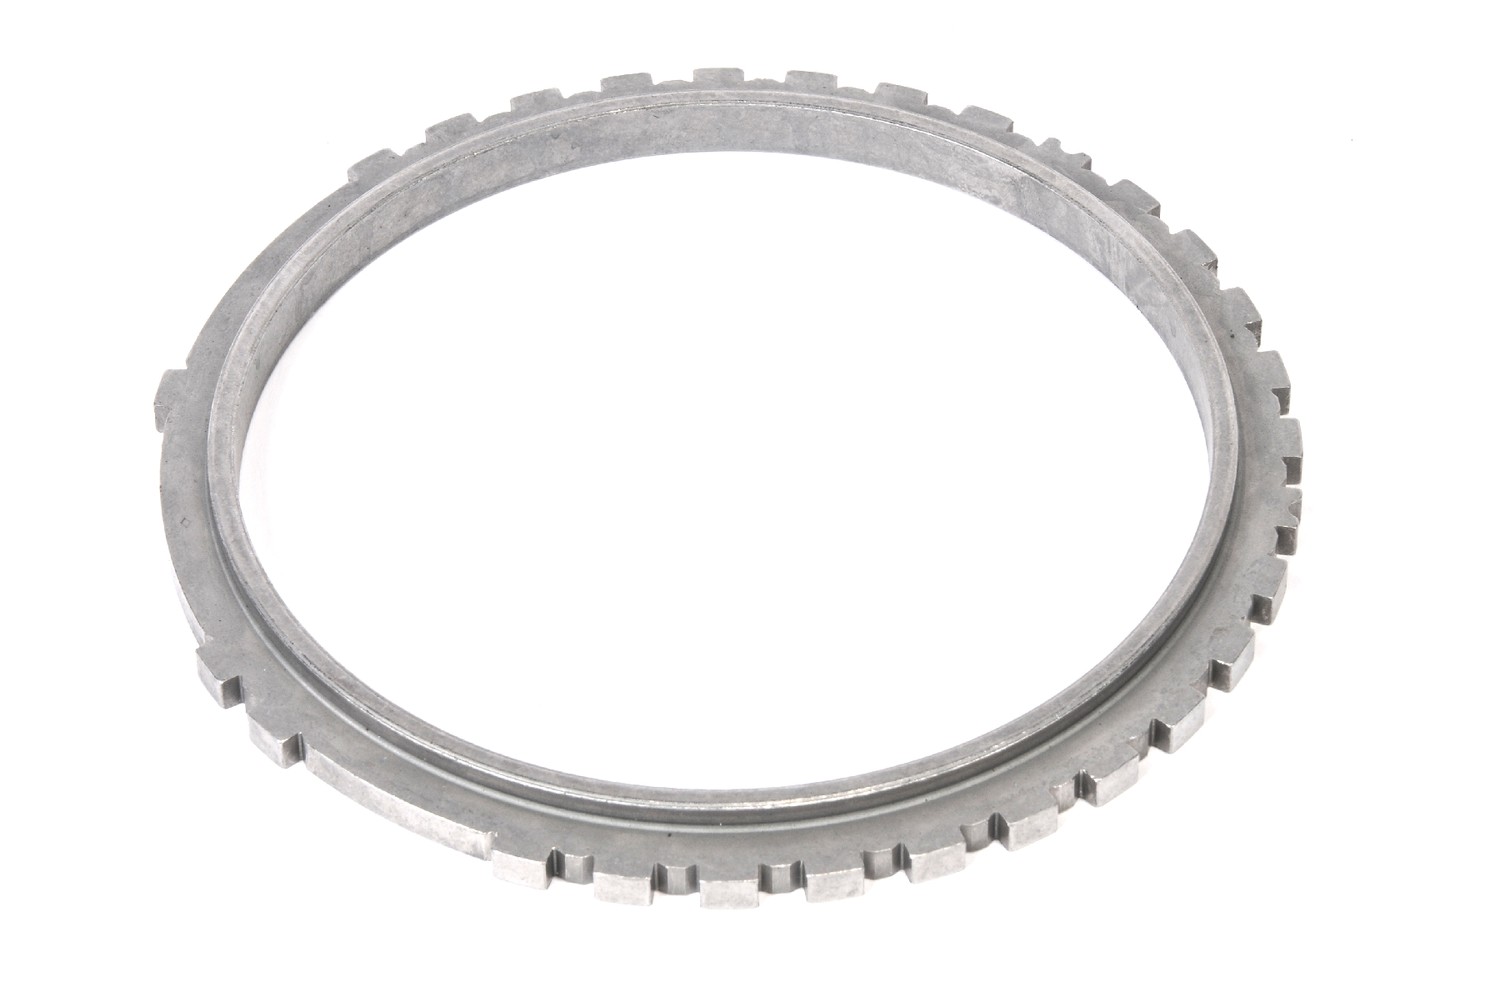 GM GENUINE PARTS - Automatic Transmission Clutch Backing Plate (1-2-3-4-5, Reverse) - GMP 24280567